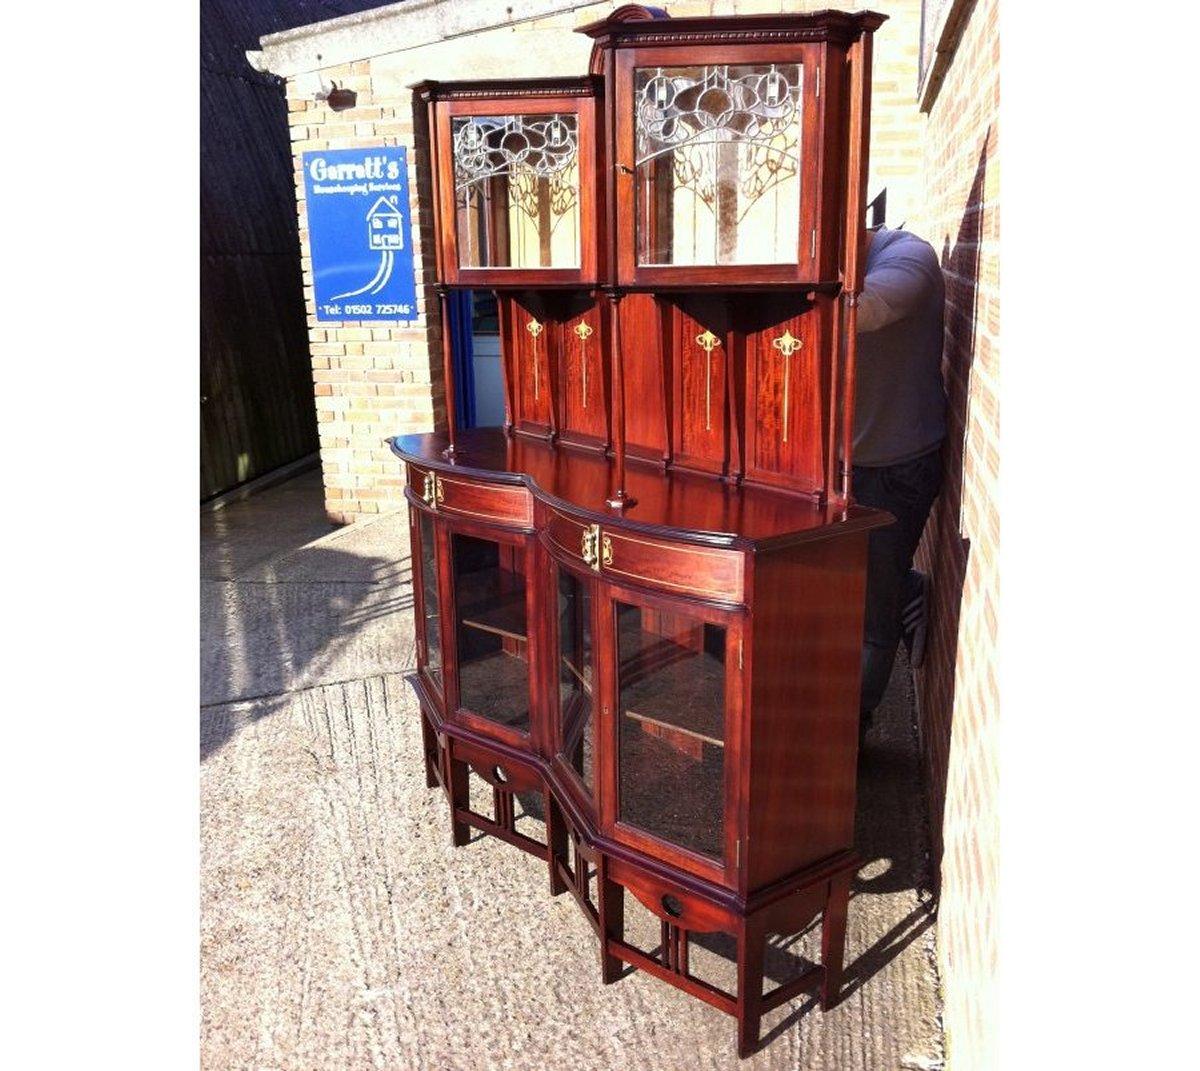 G M Ellwood for J S Henry. A fine exhibition quality 'New Art' Arts and Crafts display cabinet.
A well executed design with such fine attention to detail, twin triangular display cabinets to the upper and lower sections the upper with lead and glass